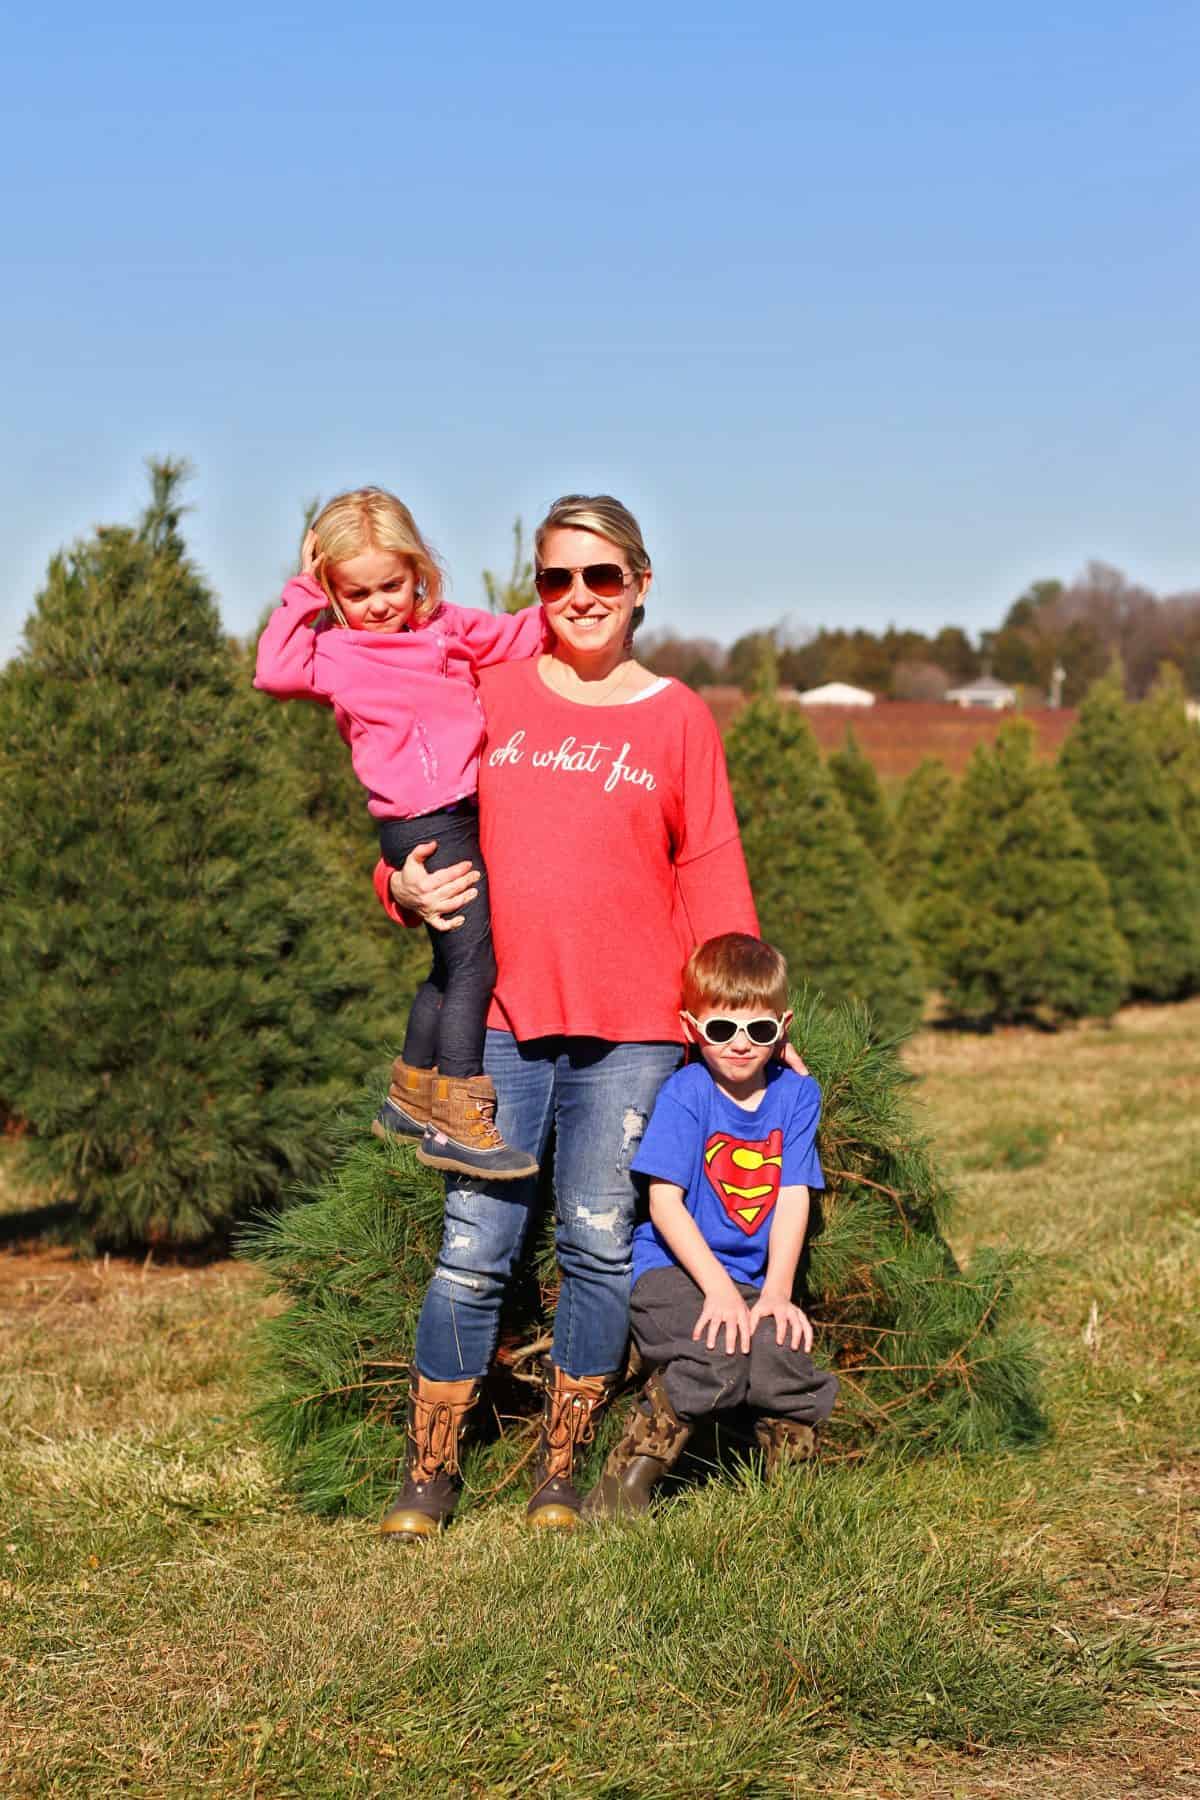 How to cut down your own Christmas tree with kids